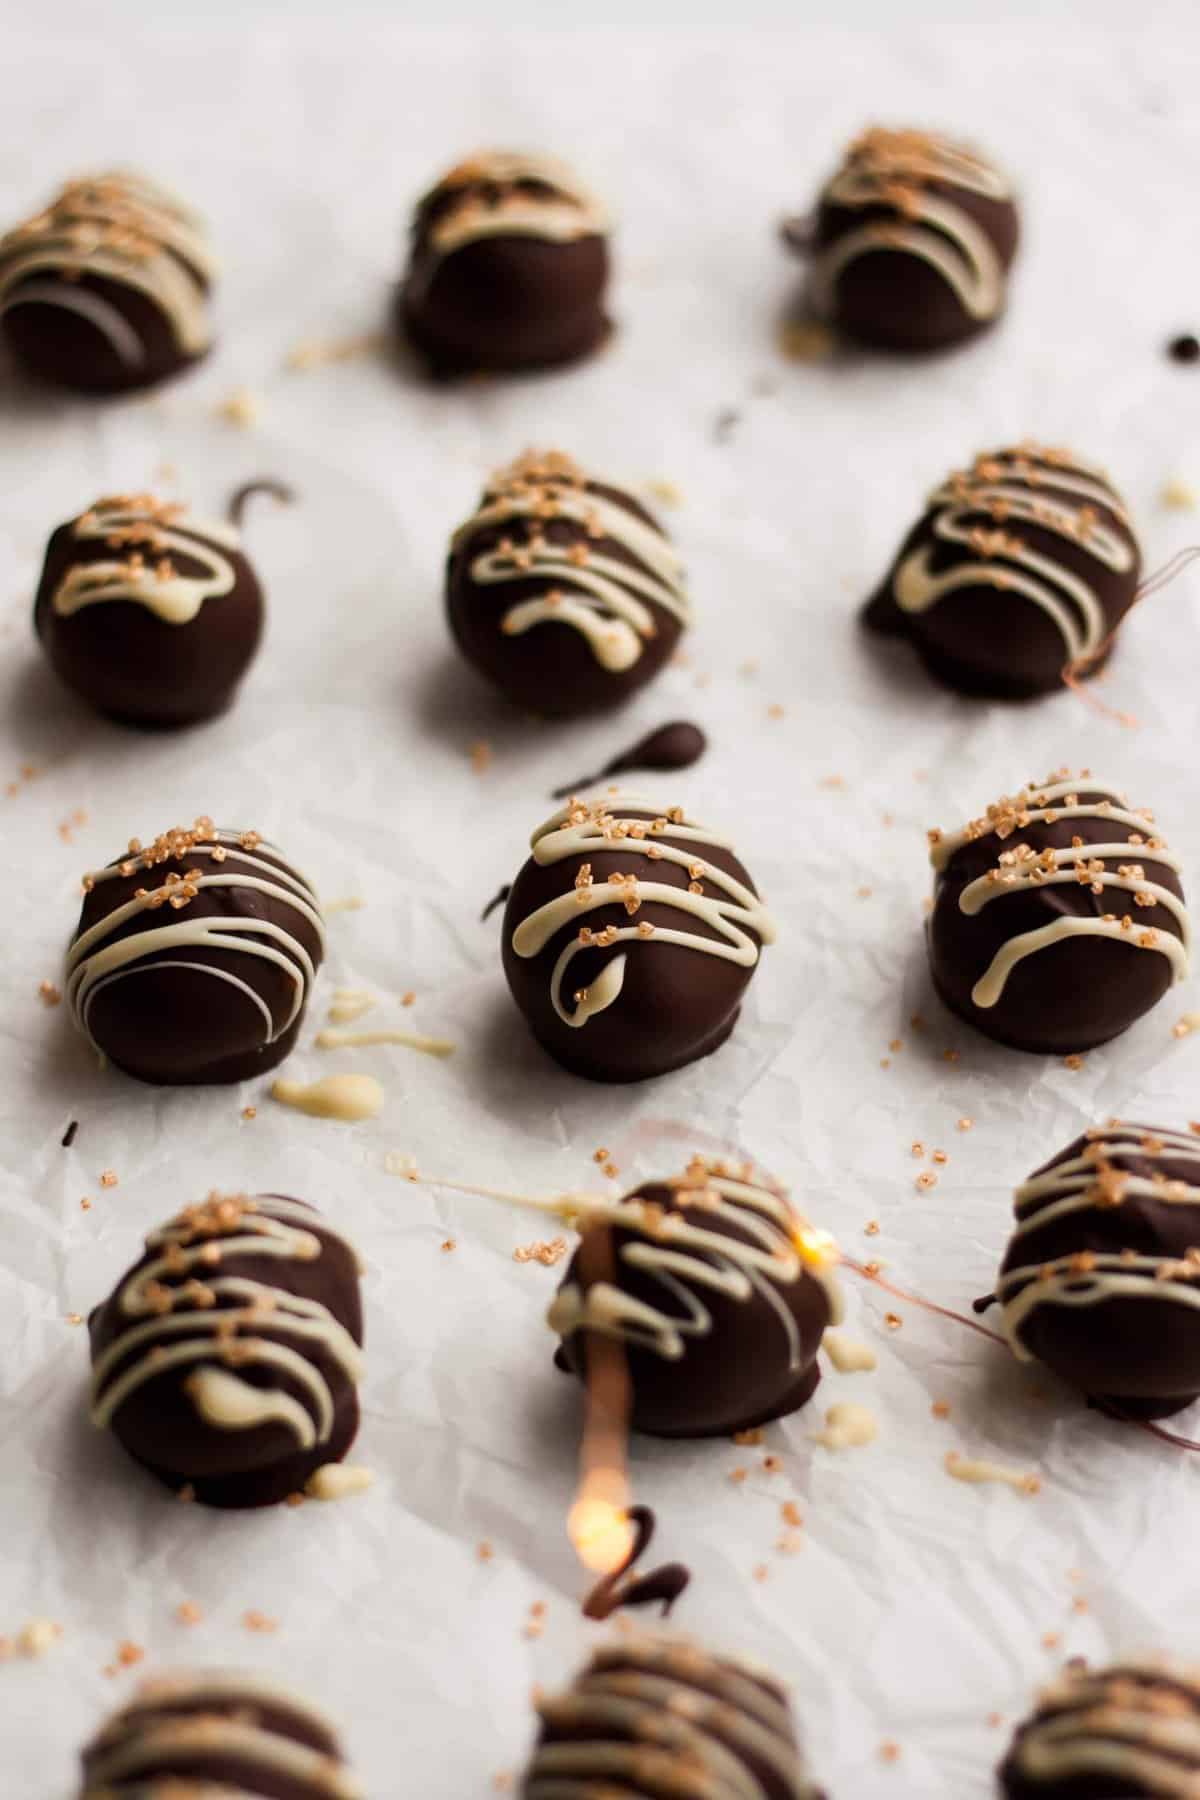 White Chocolate Nutmeg Truffles - these indulgent truffles are spiced with that wonderful festive spice, nutmeg. They would make the perfect edible gift! | eatloveeats.com